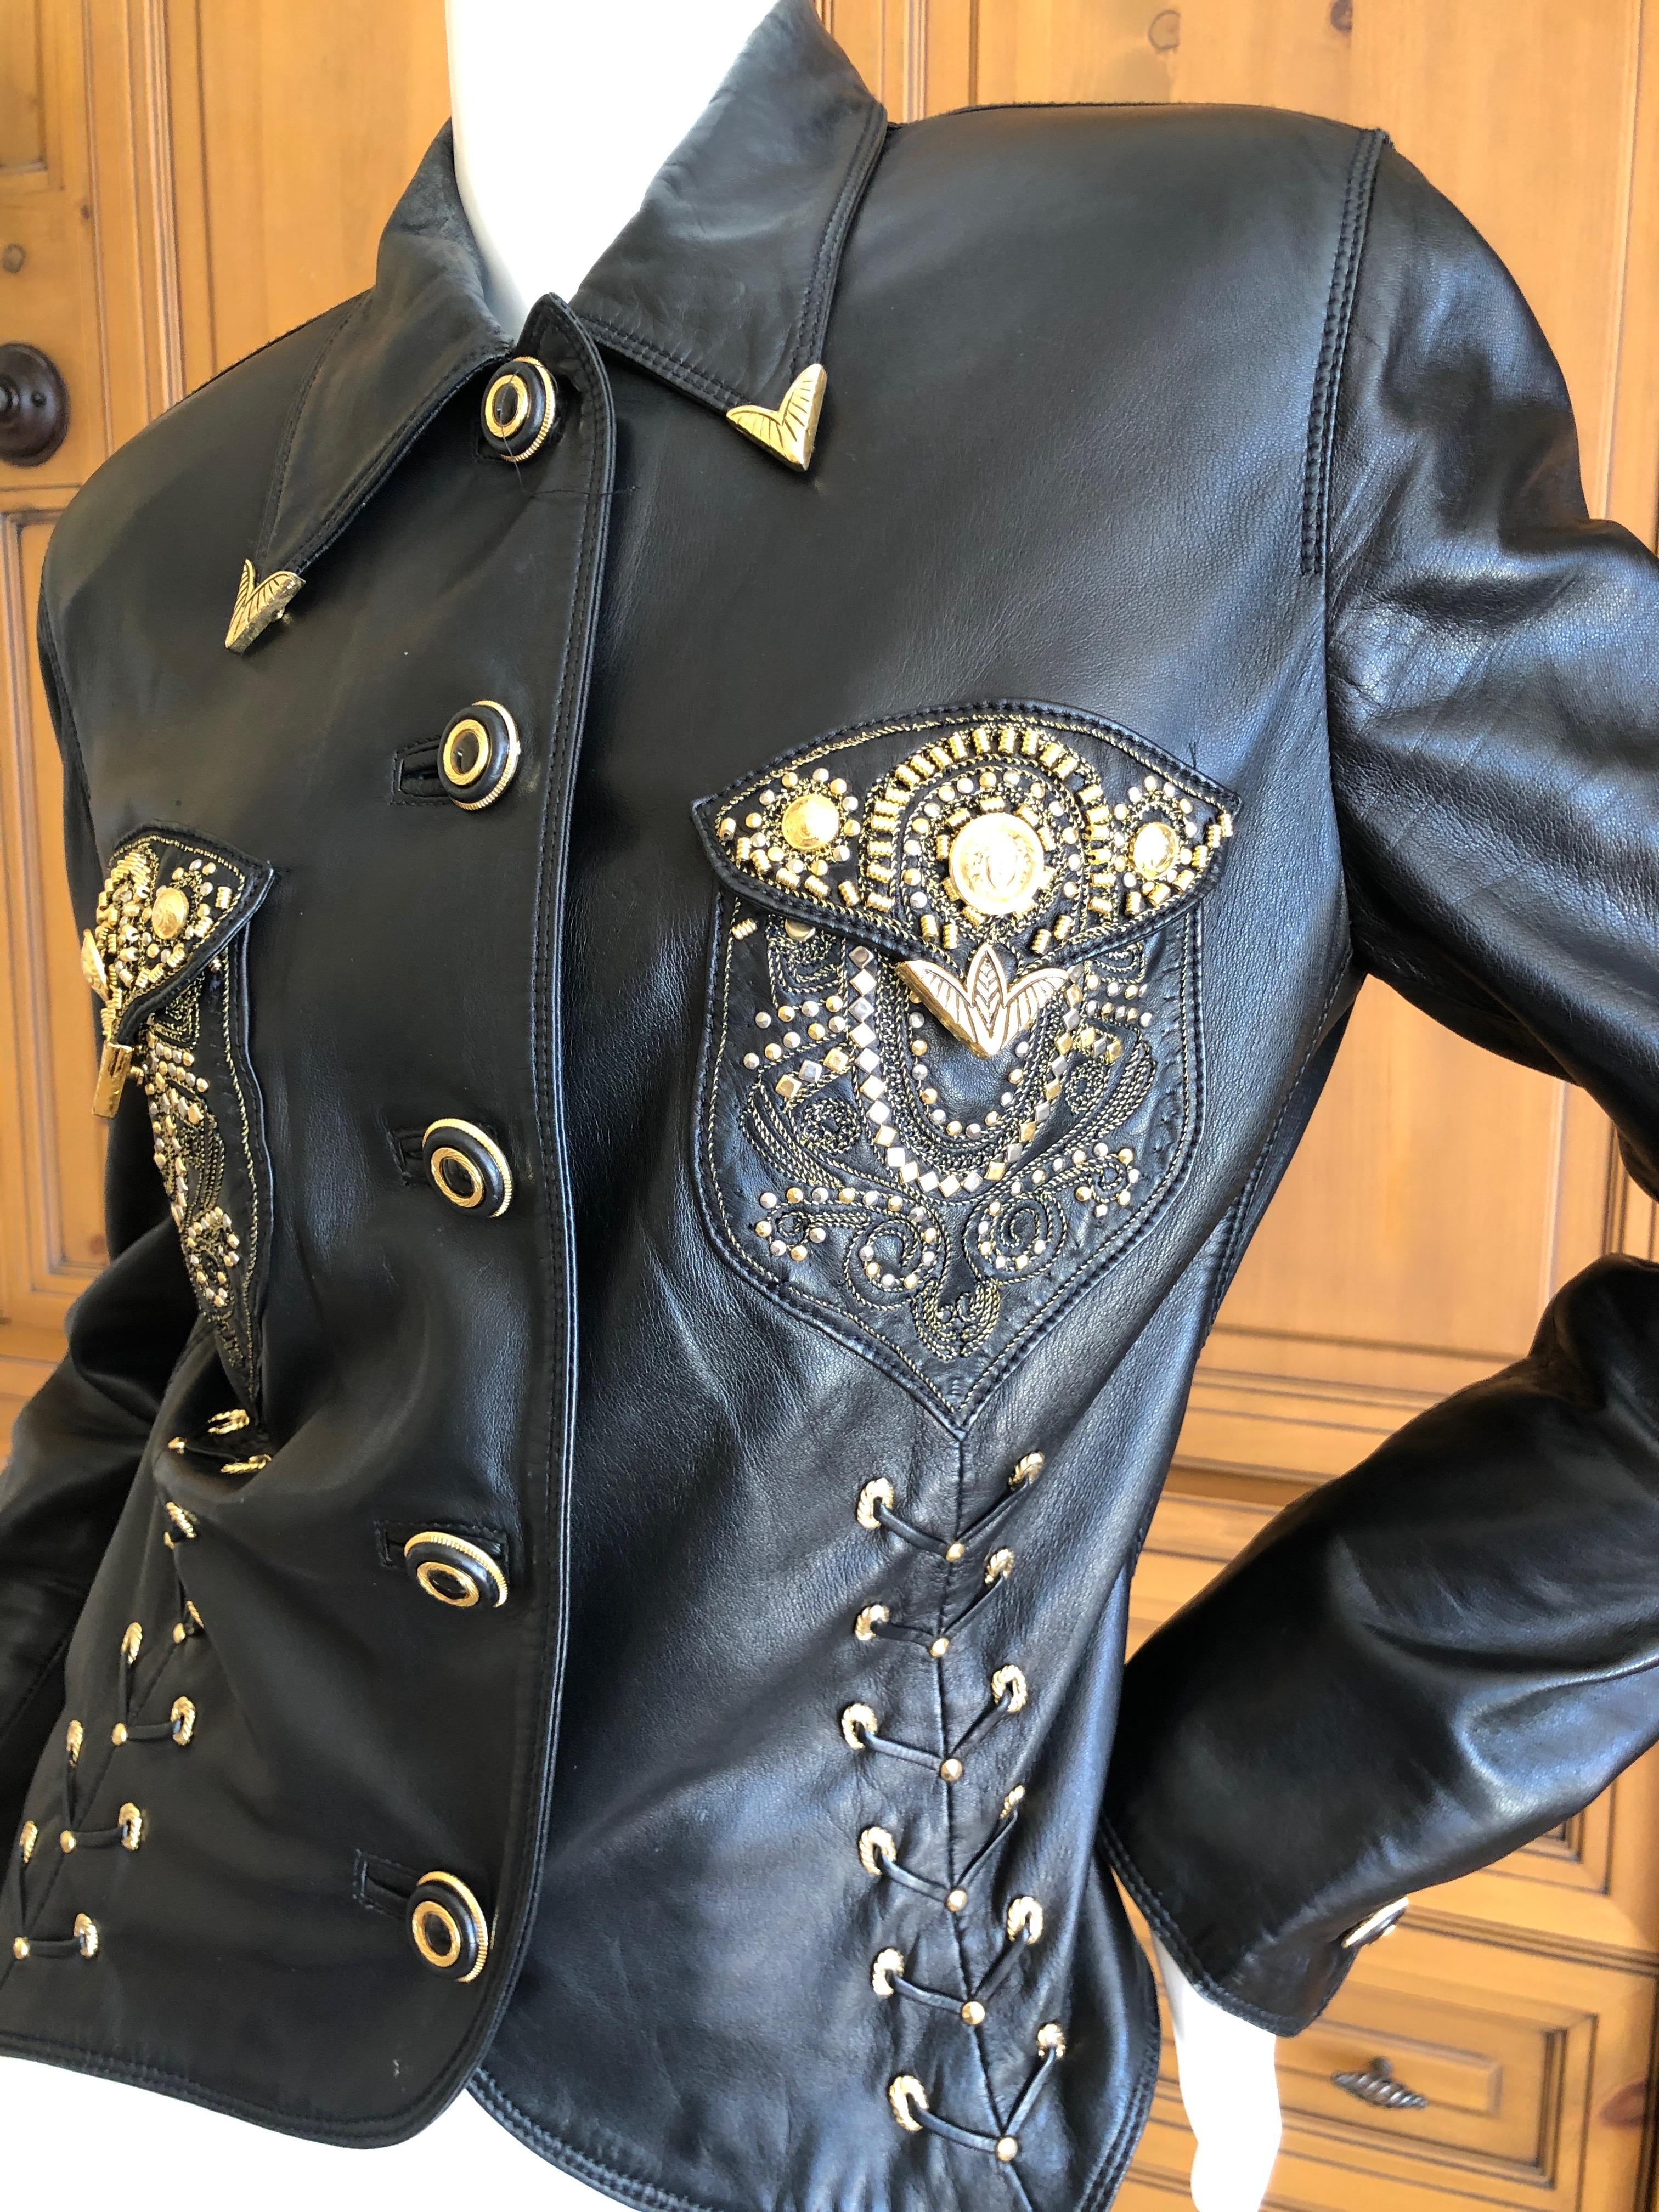 Gianni Versace 1990 Lambskin Leather Moto Jacket with Gold Embellishment For Sale 3